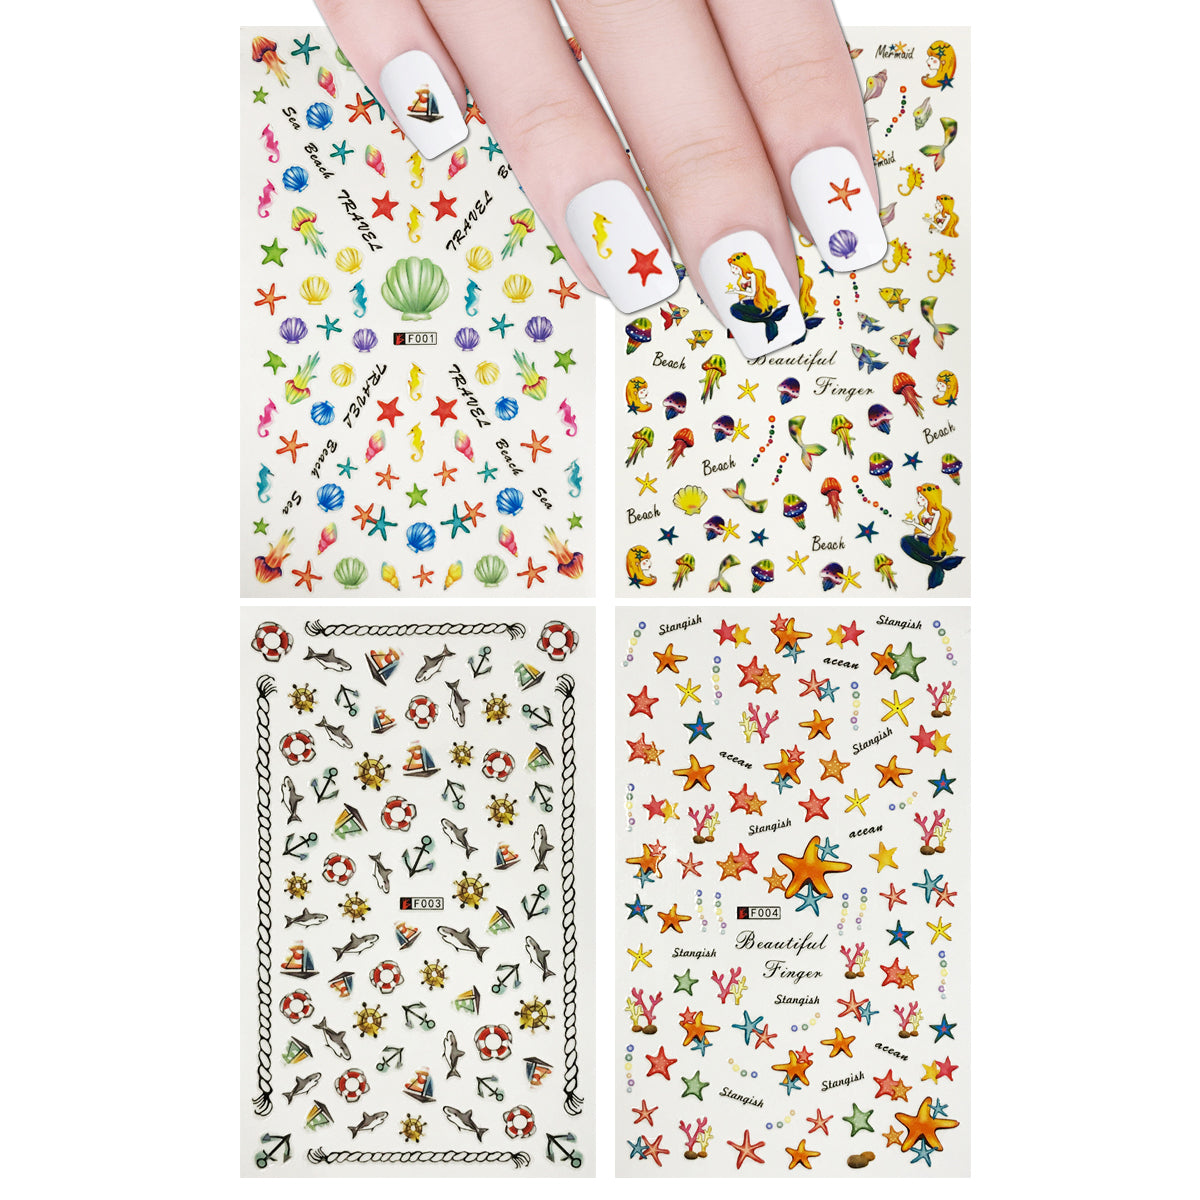 restocked) Pokemon nail stickers/nail art (M327), Beauty & Personal Care,  Hands & Nails on Carousell